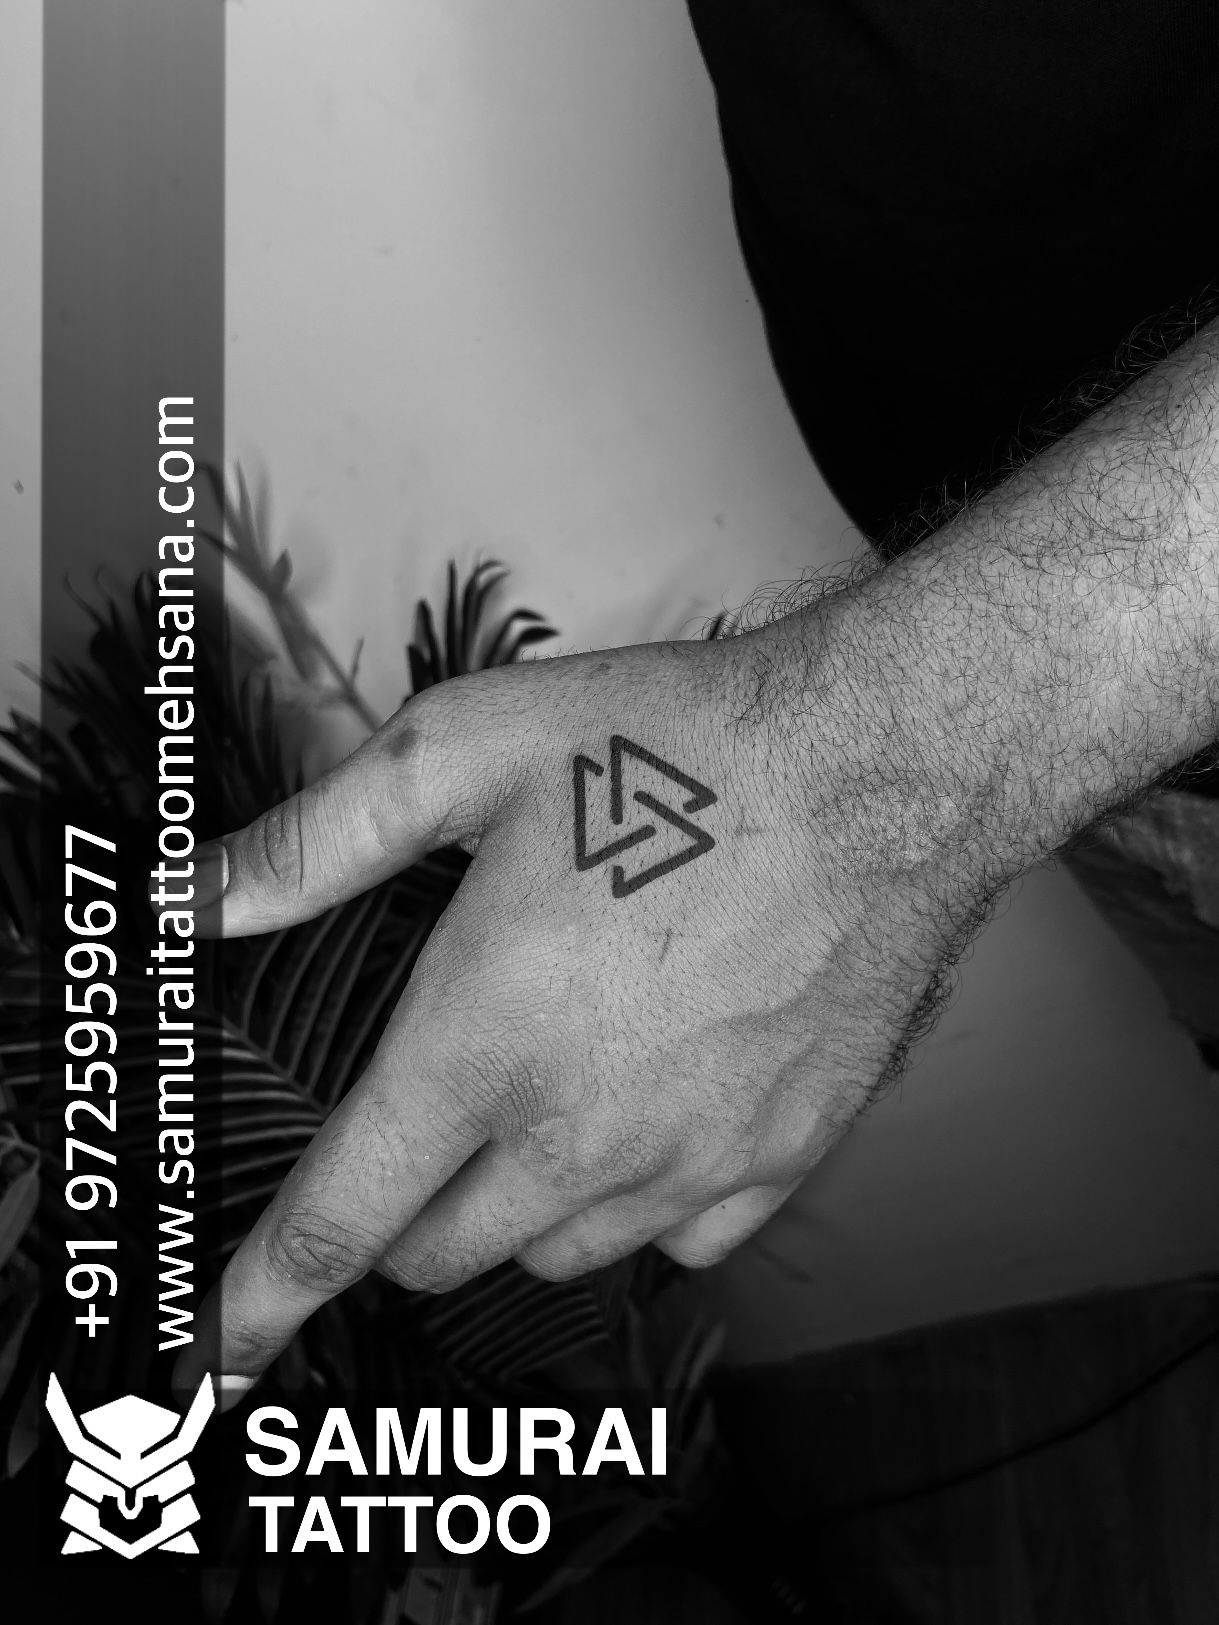 Dispersion Triangle tattoo by Live Two - Best Tattoo Ideas Gallery